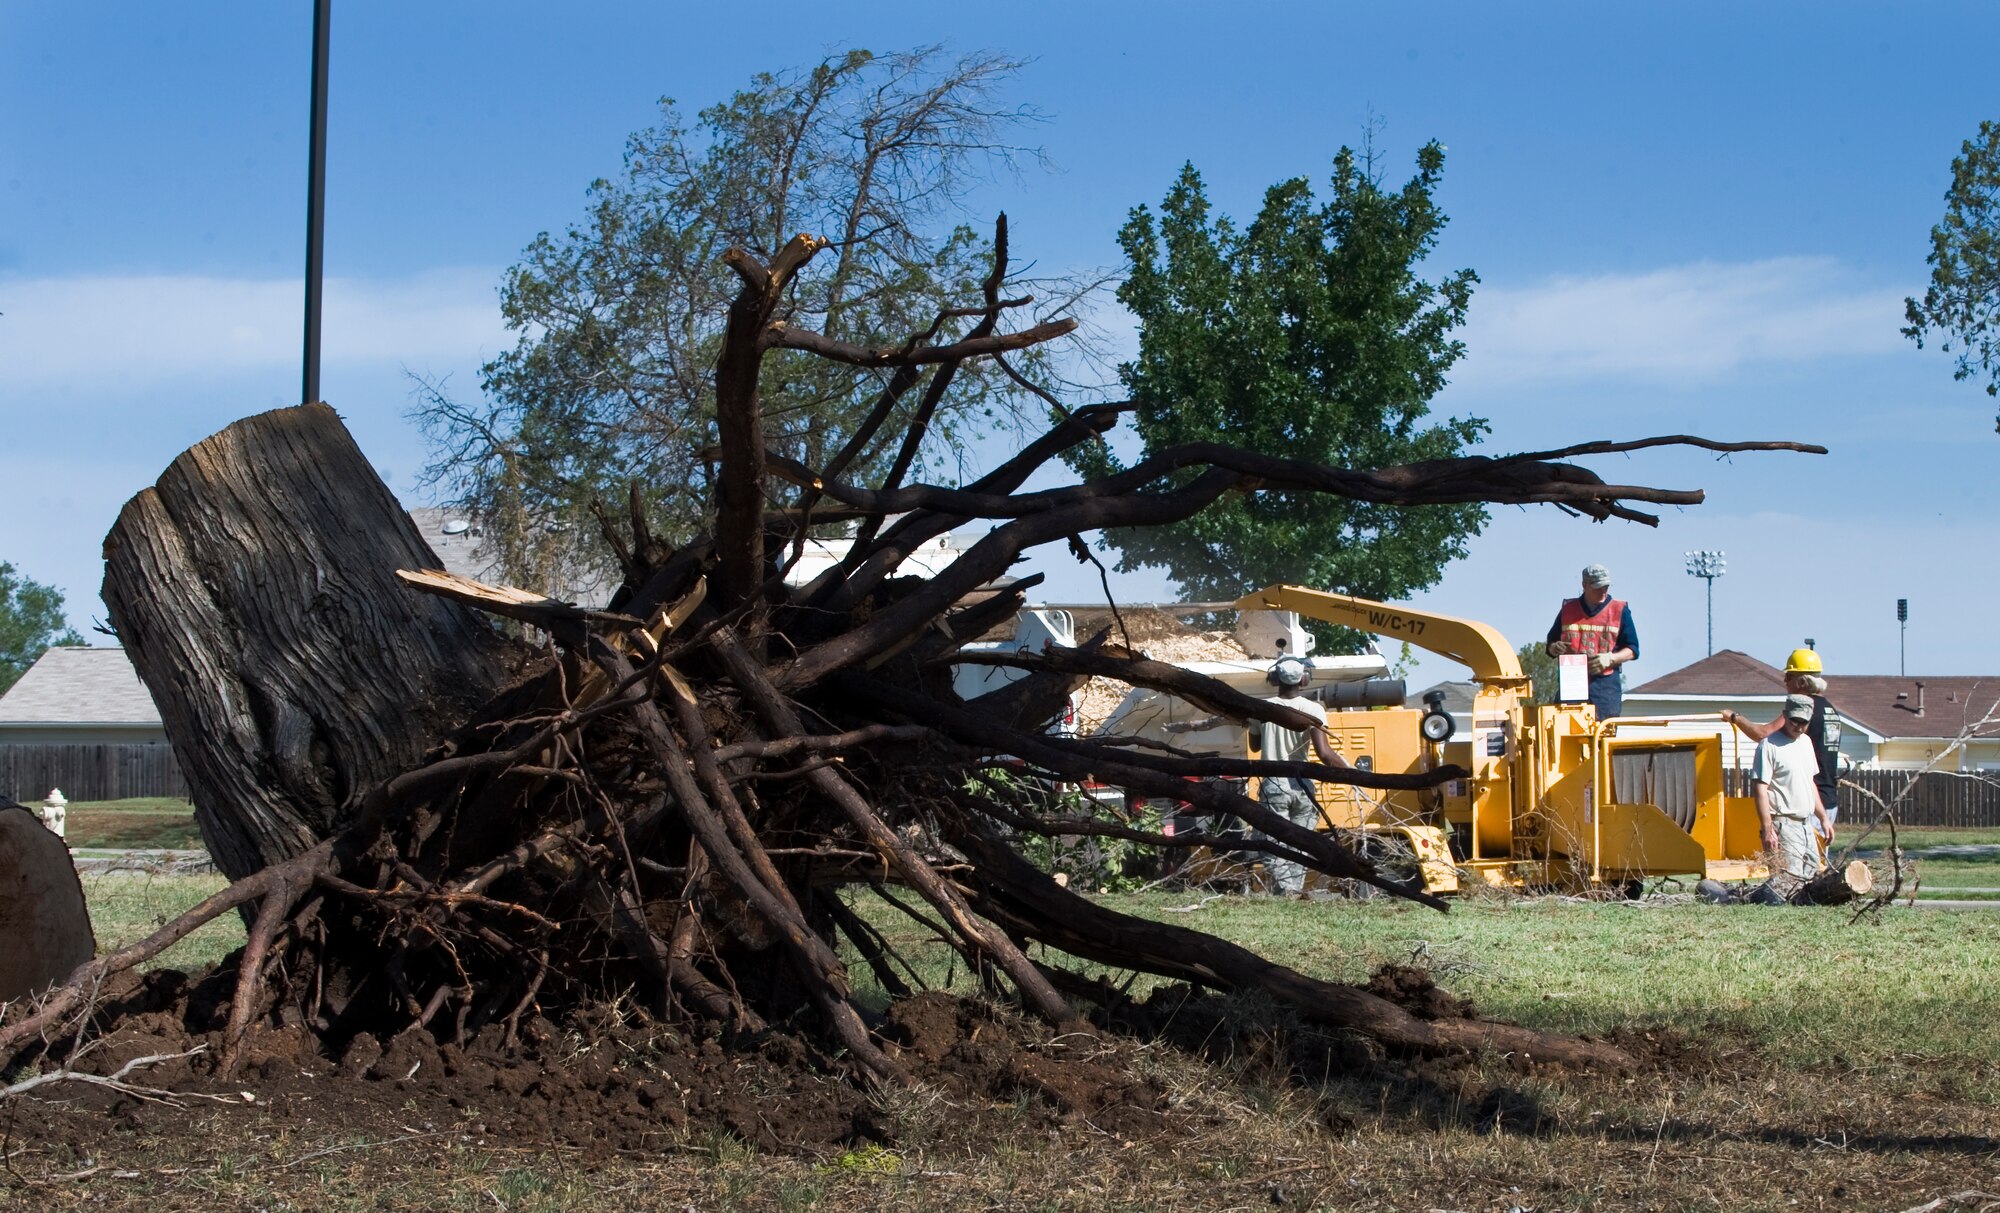 U.S. Air Force Airmen from the 7th Civil Engineer Squadron (CES) dispose of an uprooted tree after a storm subsided June 18, 2013, at Dyess Air Force Base, Texas. Due to the storm, there was loss of power to the base, downed trees, roof damage and broken windows. Repairs were quickly made by multiple 7th CES shops to include pavements and equipment, structures, water and fuel systems maintenance, electric, power production and heating, ventilation and air conditioning. (U.S. Air Force photo by Senior Airman Jonathan Stefanko/Released)